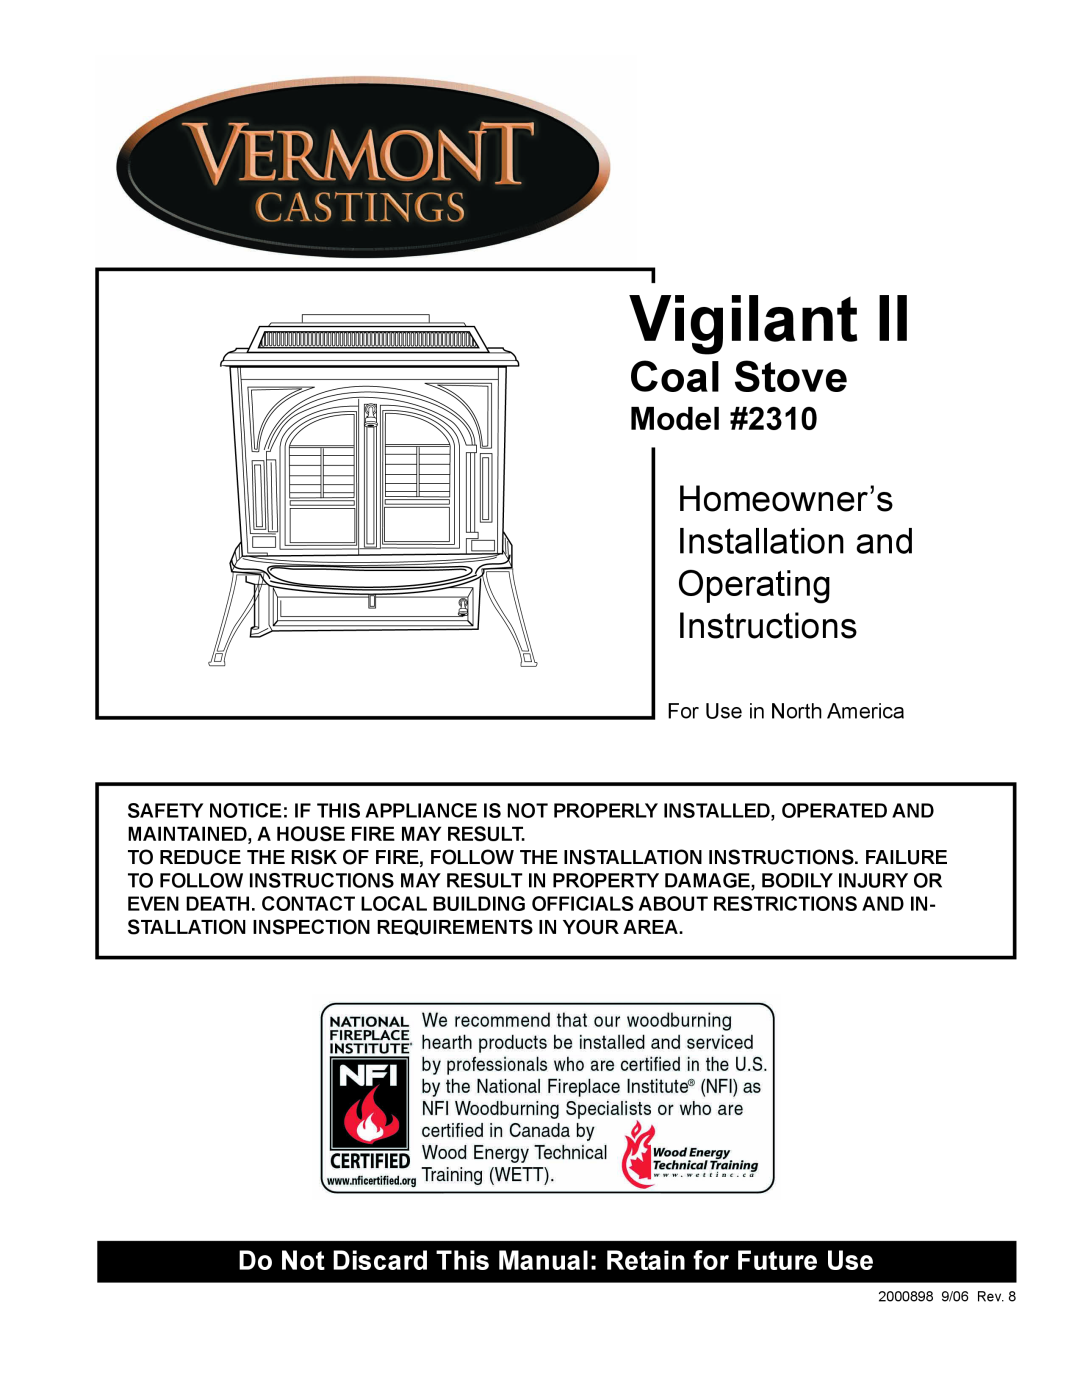 Vermont Casting operating instructions Coal Stove, Model #2310, Vigilant, Homeowner’s Installation and Operating 